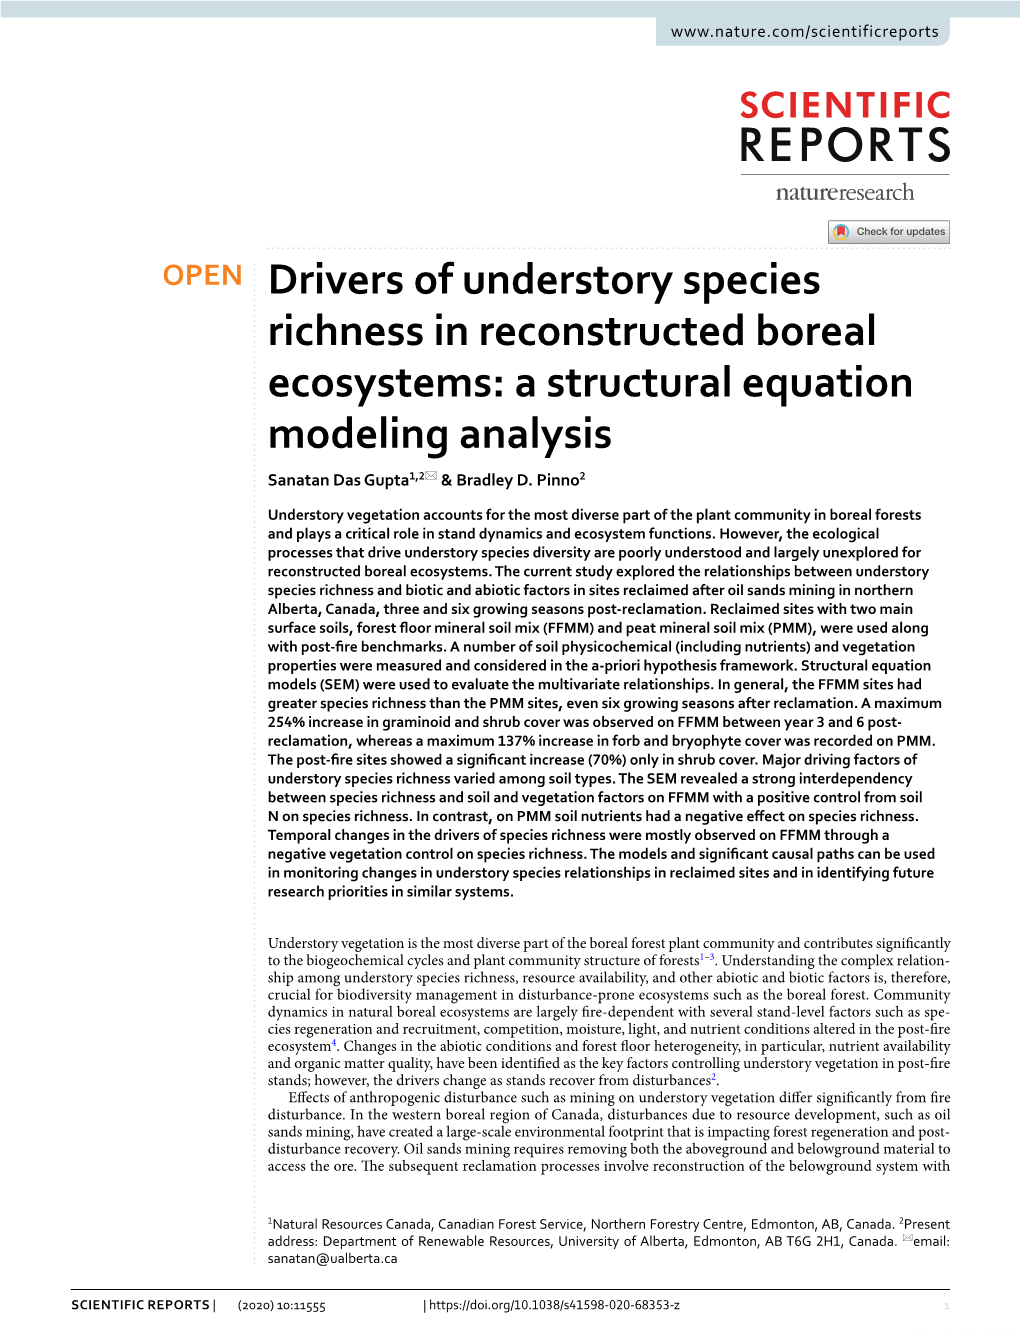 Drivers of Understory Species Richness in Reconstructed Boreal Ecosystems: a Structural Equation Modeling Analysis Sanatan Das Gupta1,2* & Bradley D